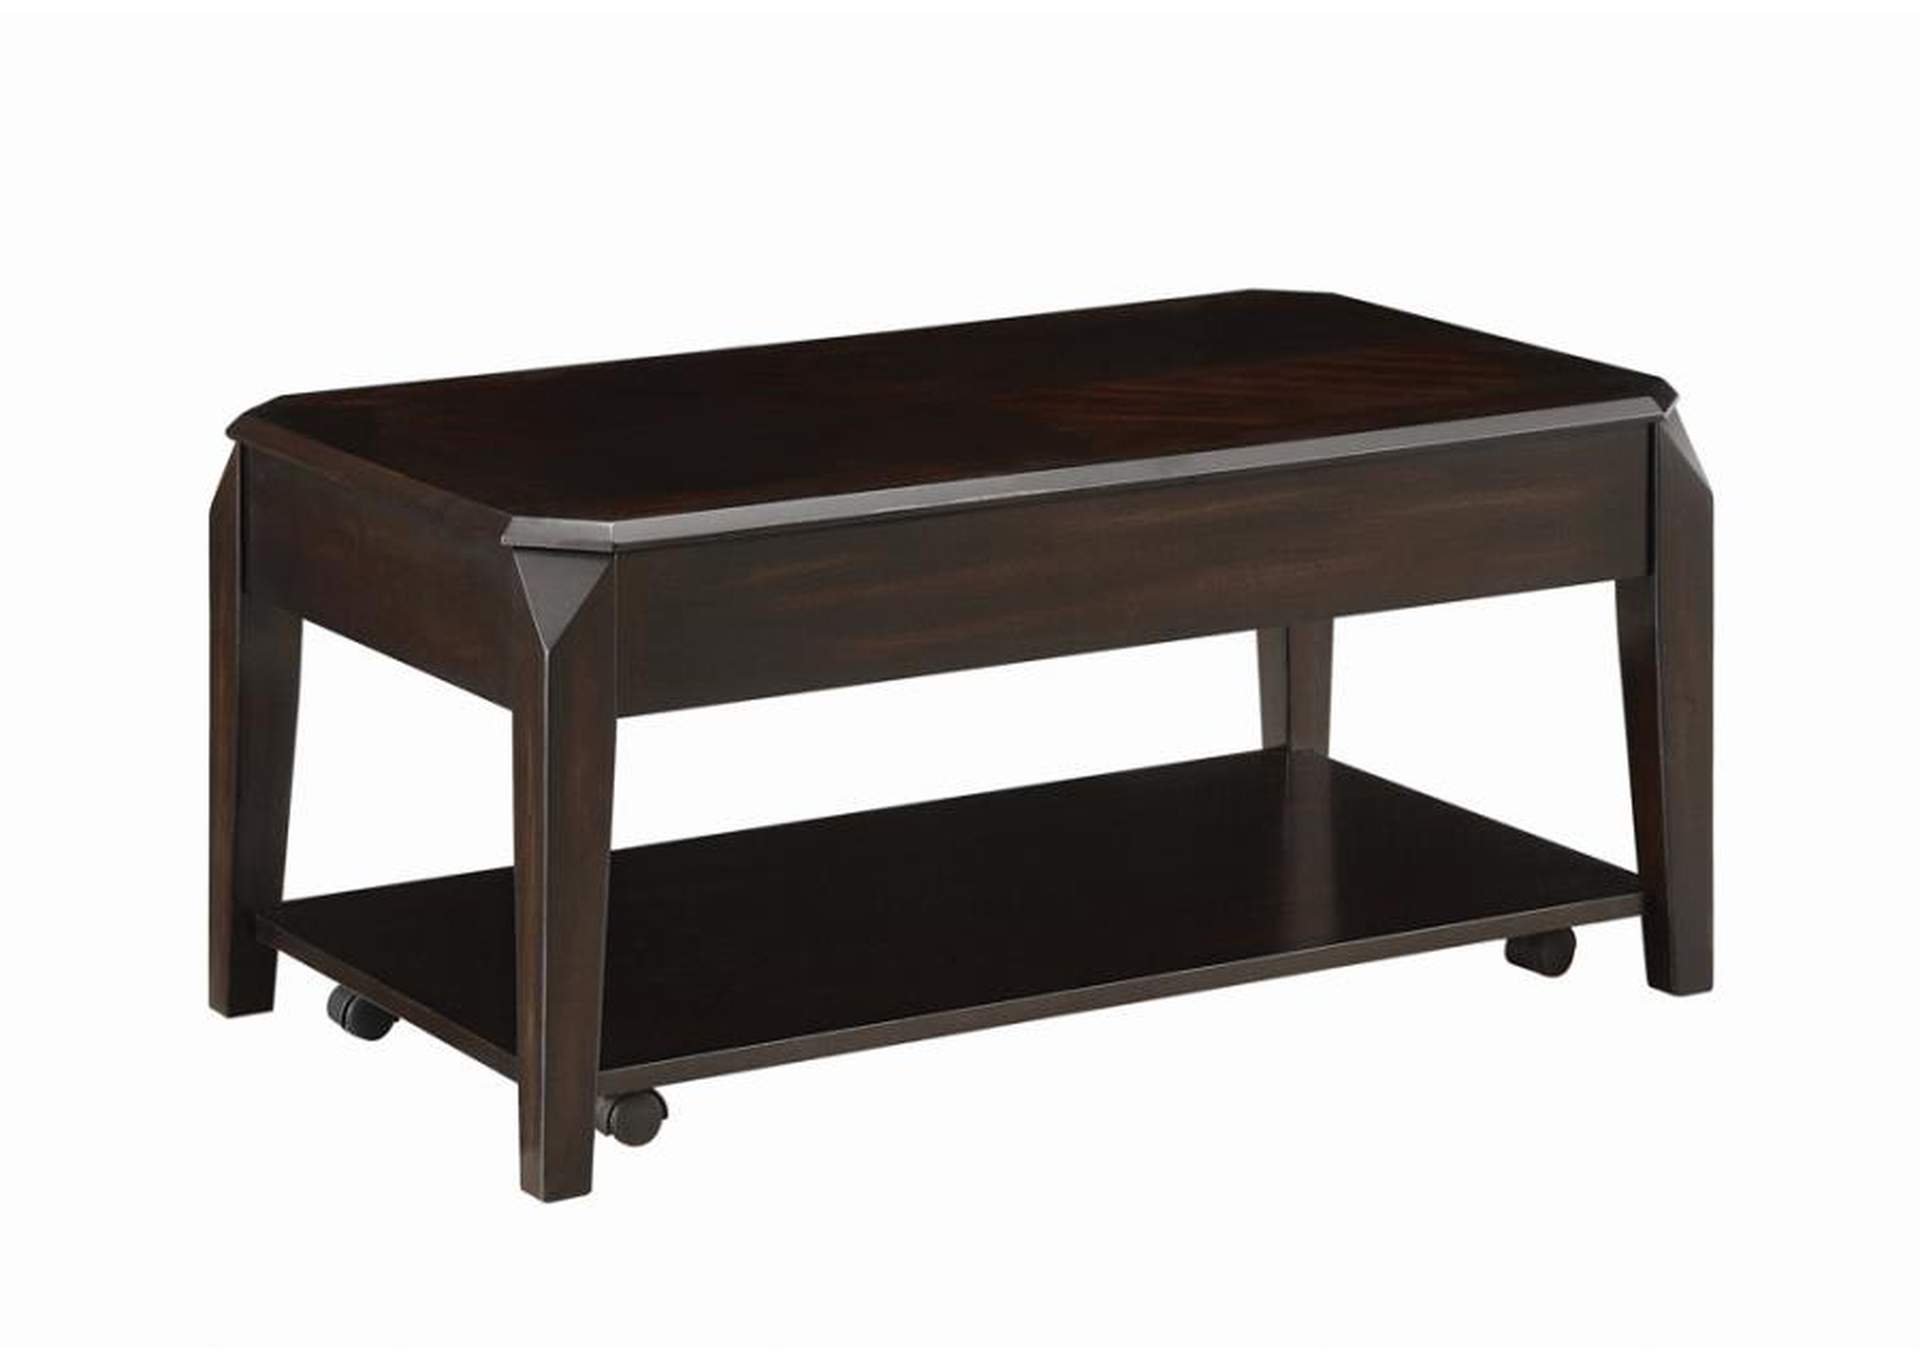 Baylor Lift Top Coffee Table With Hidden Storage Walnut,Coaster Furniture